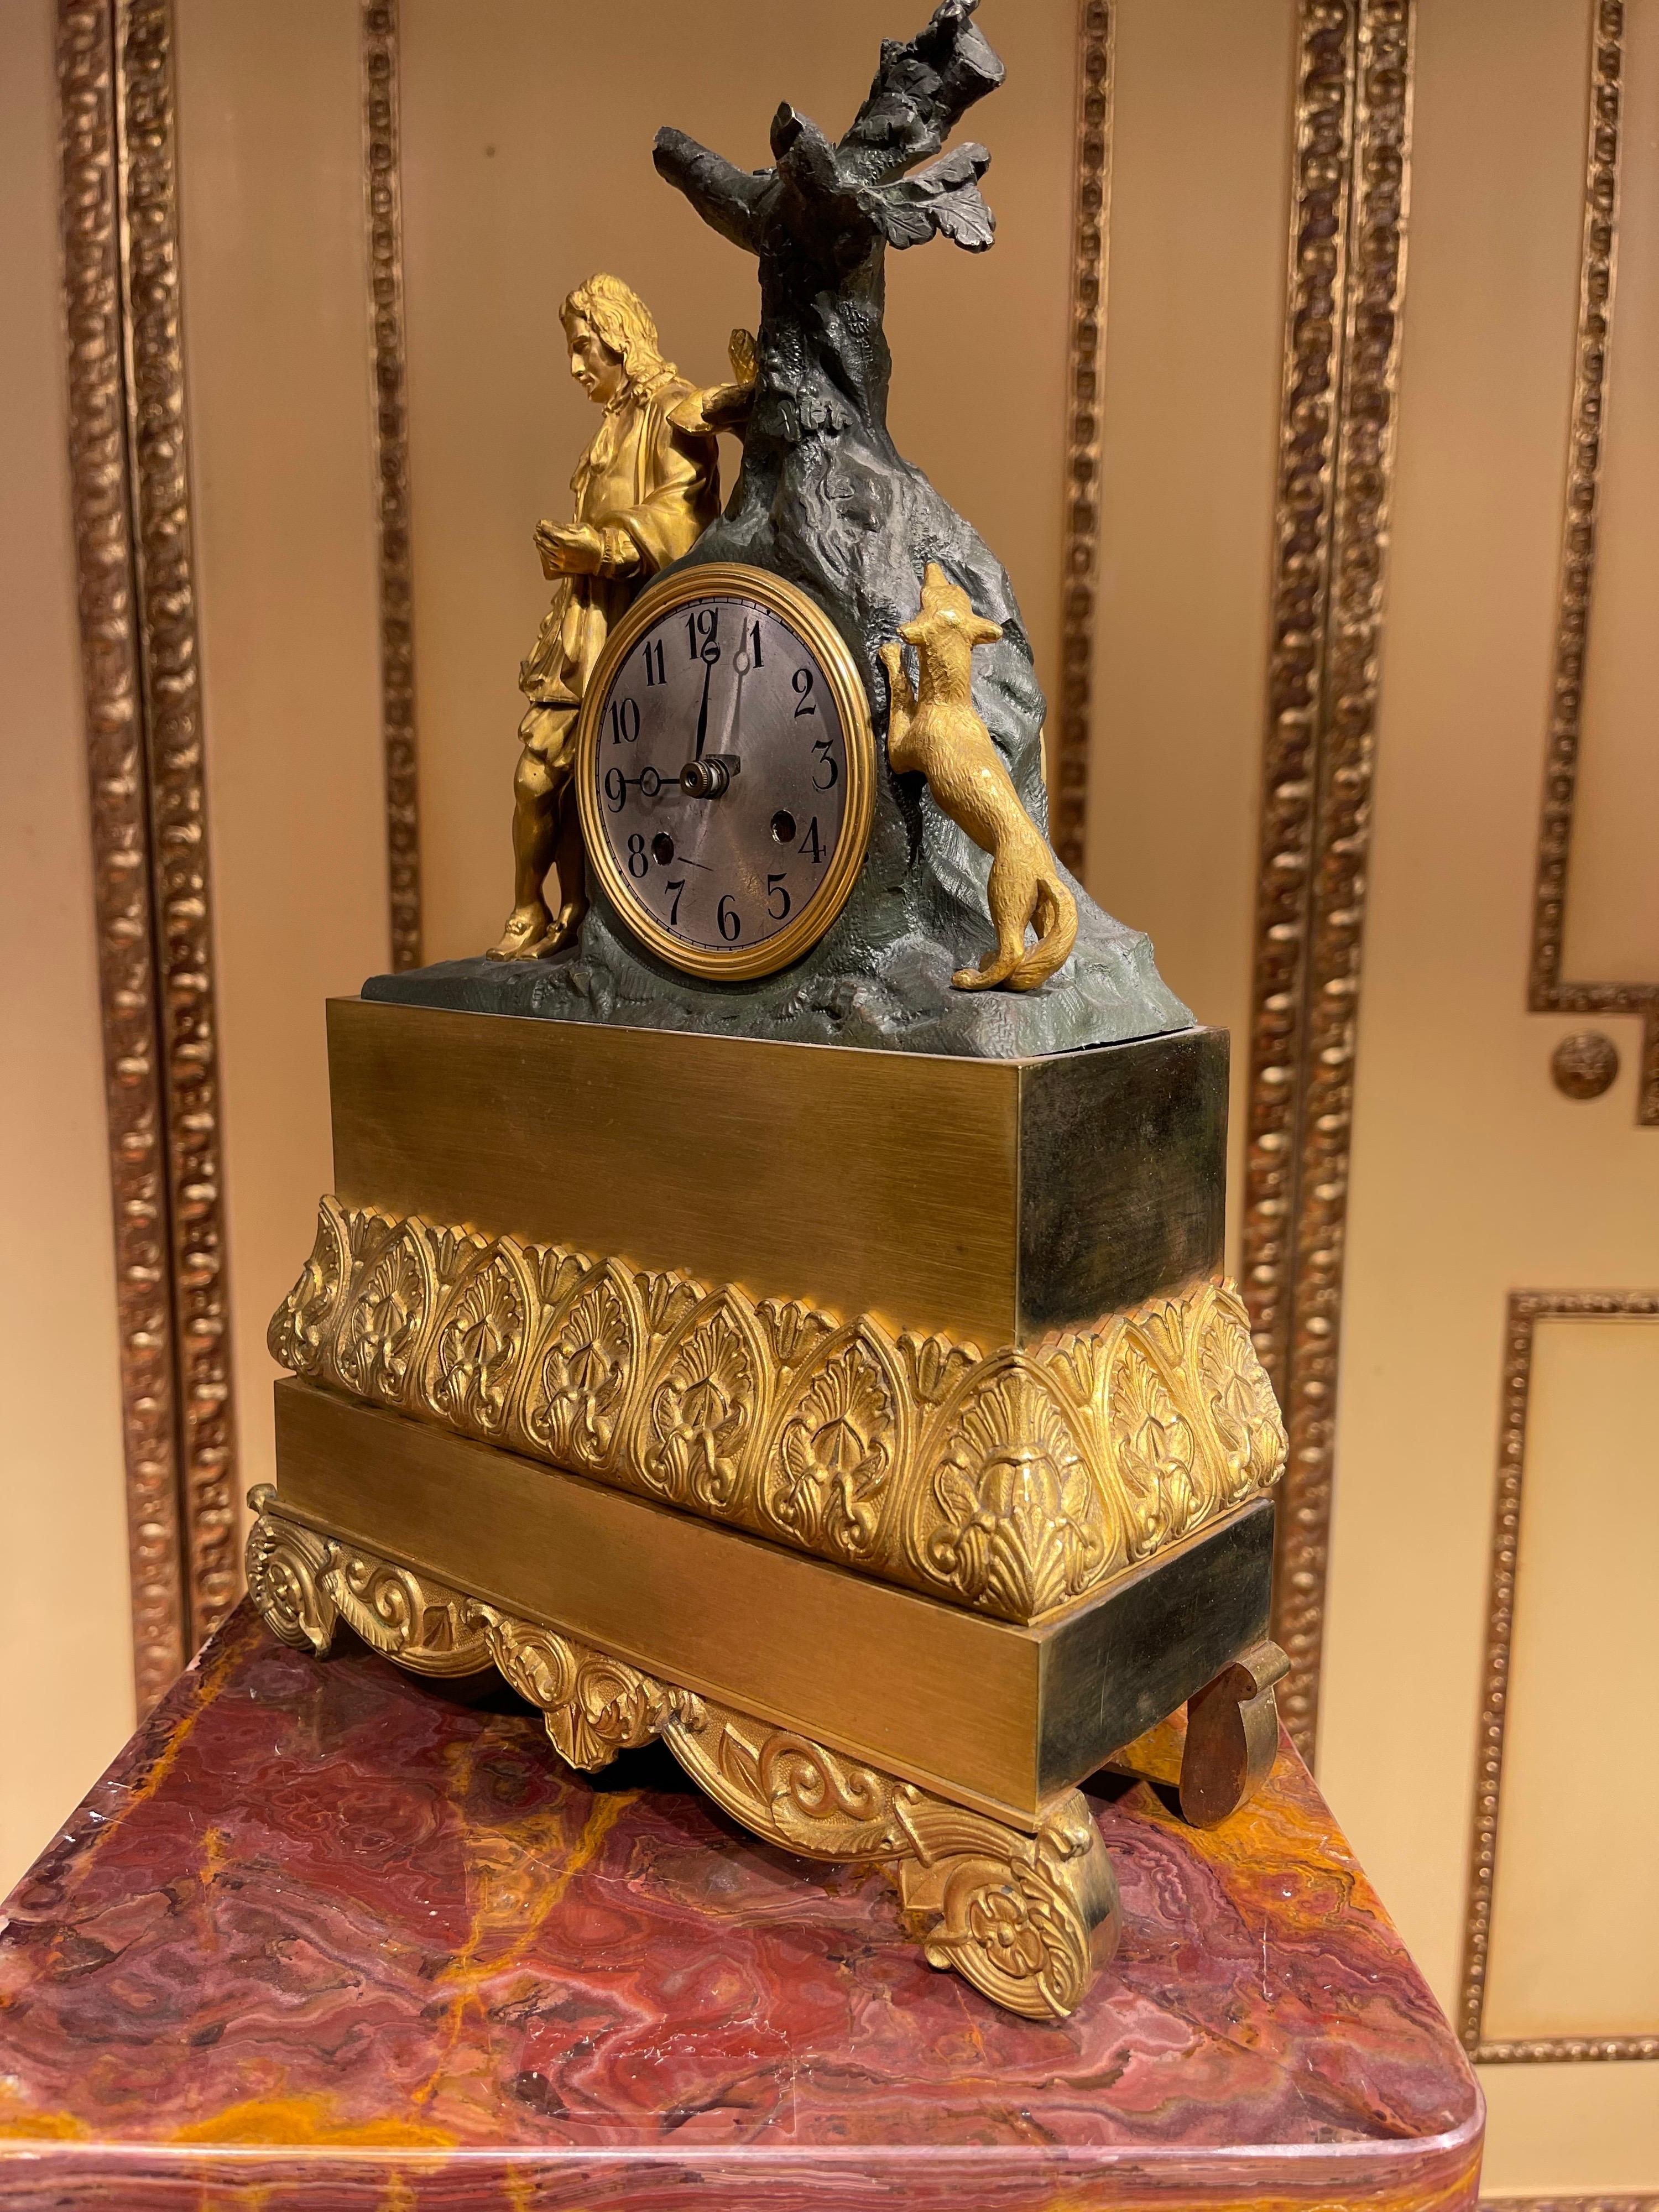 Mid-19th Century Antique Mantel Clock from around 1850, France, Fire-Gilded For Sale